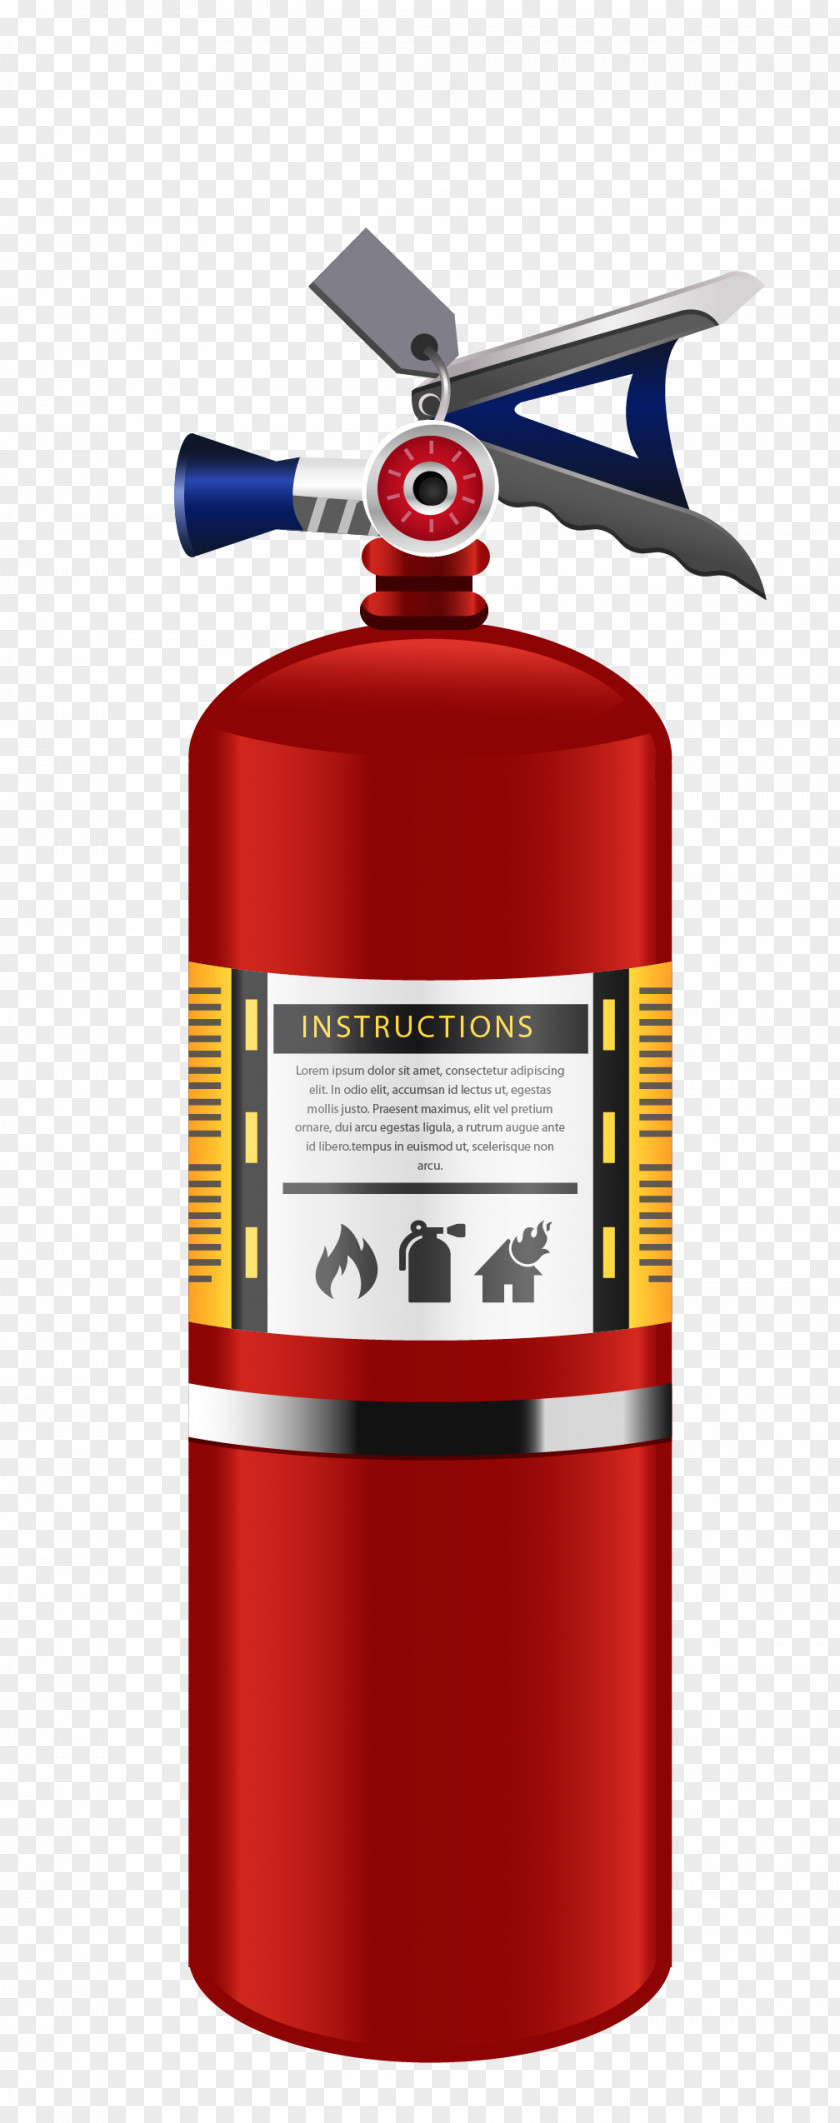 Textured Material Vector Red Fire Extinguisher Firefighting Foam PNG